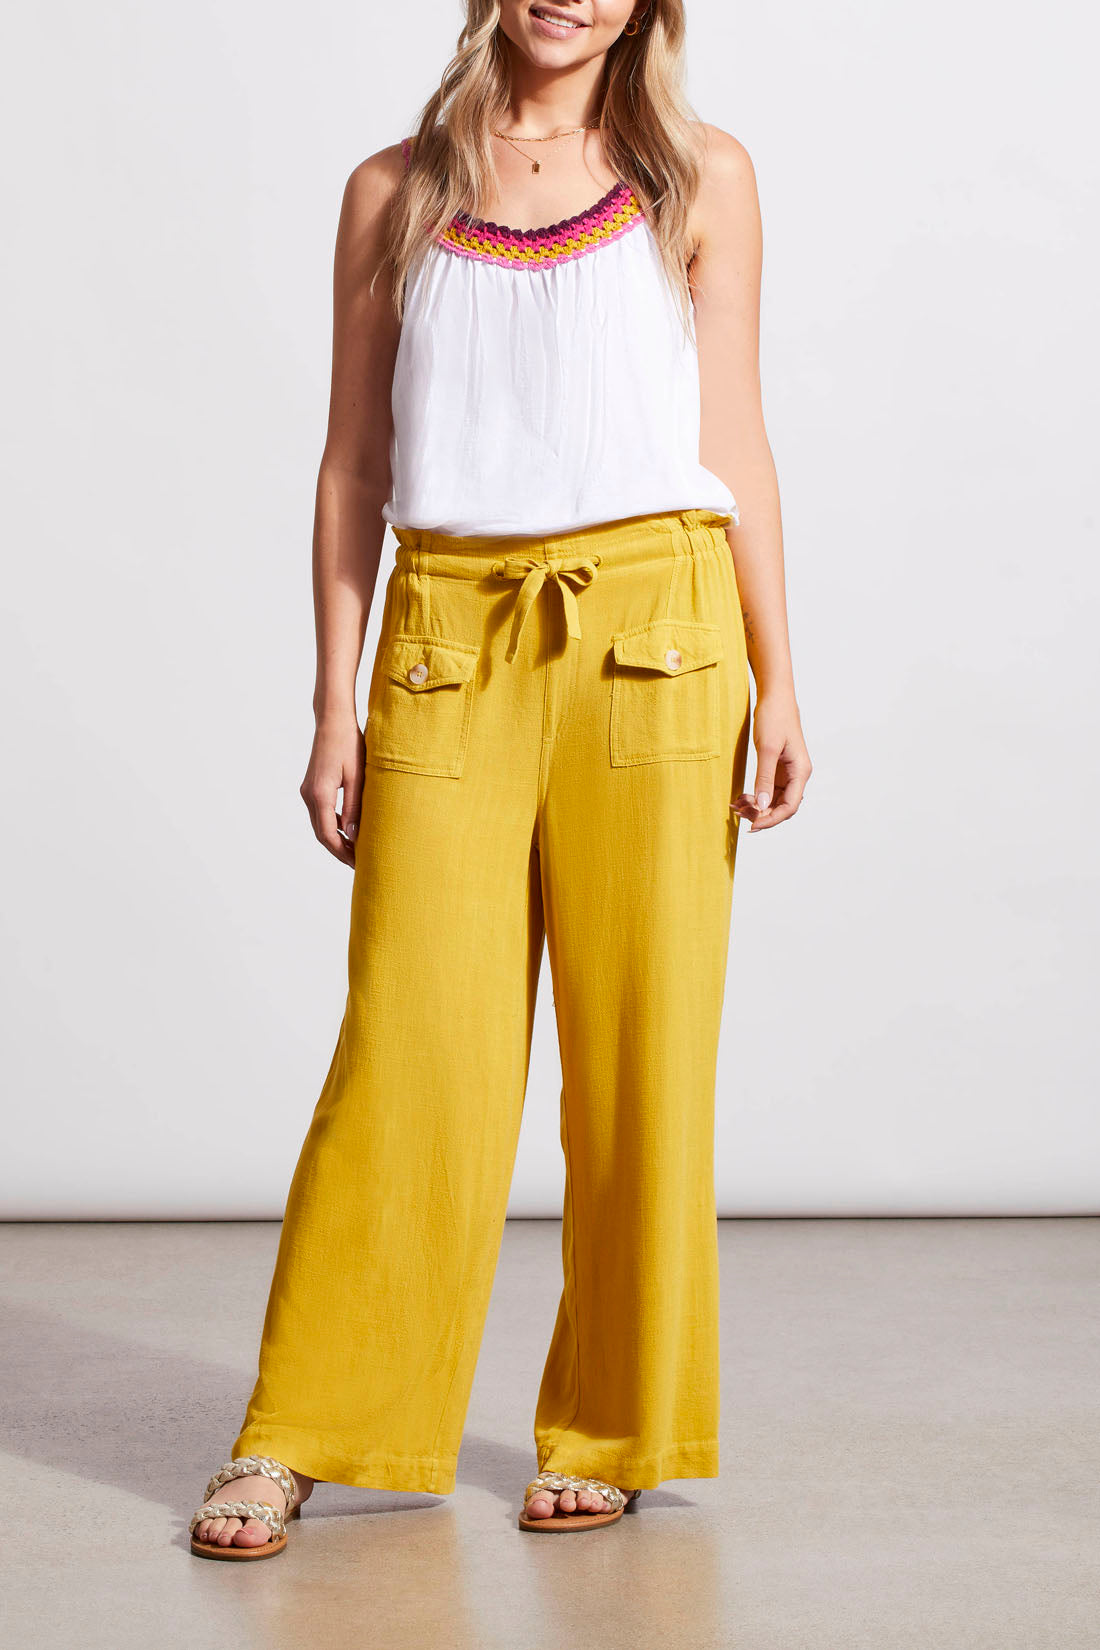 No-Tribe Clothing — The sikani tux pants - white and gold